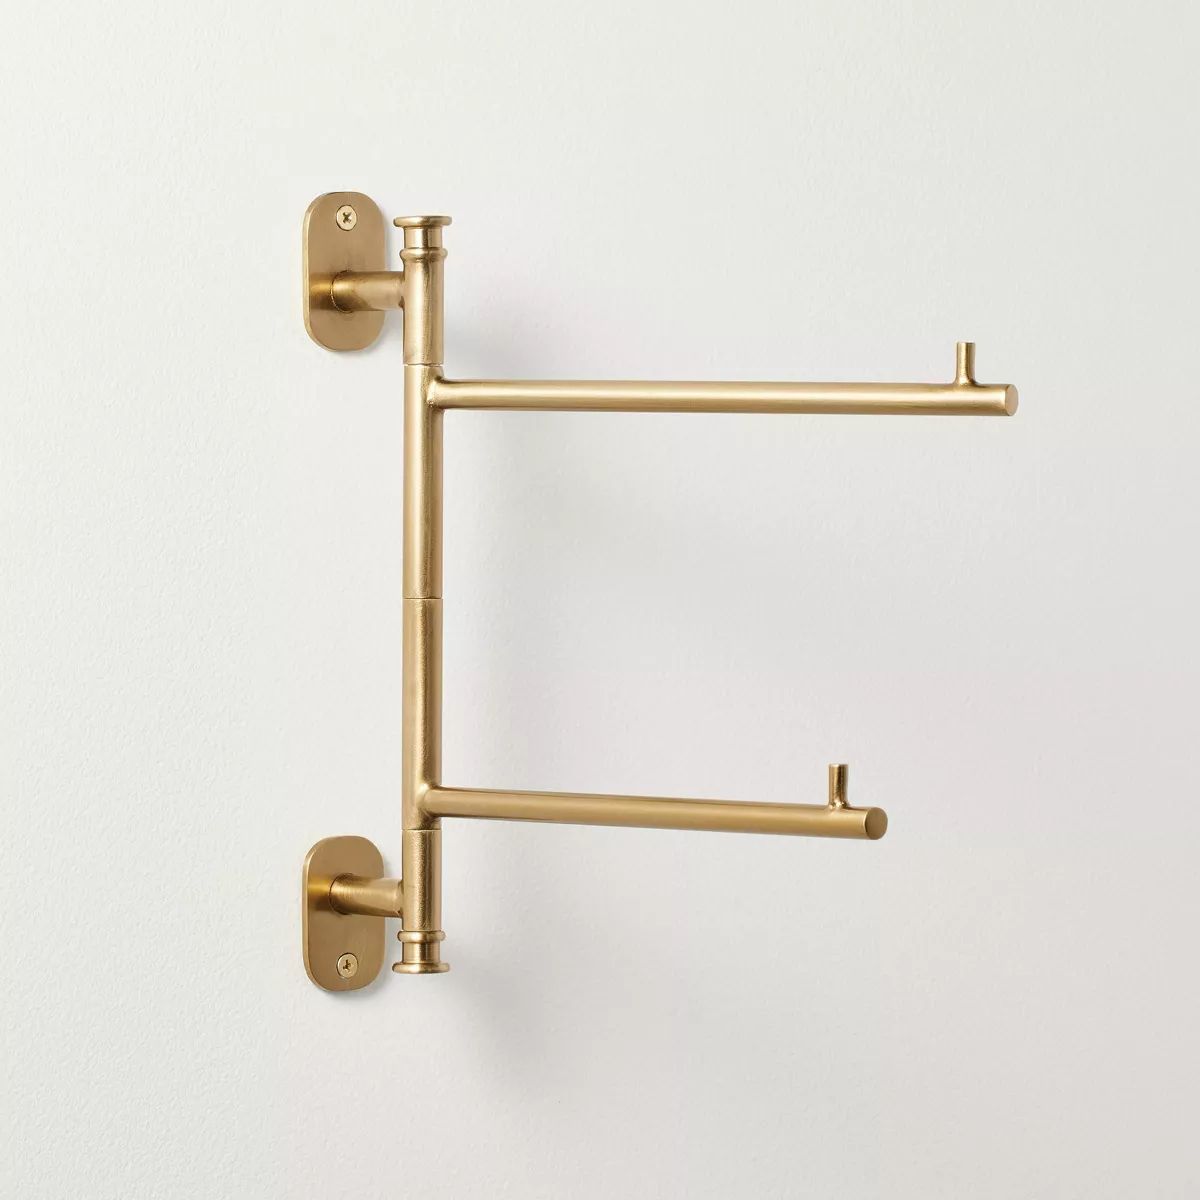 Wall-Mounted Metal Swivel Hand Towel Rack Brass Finish - Hearth & Hand™ with Magnolia | Target